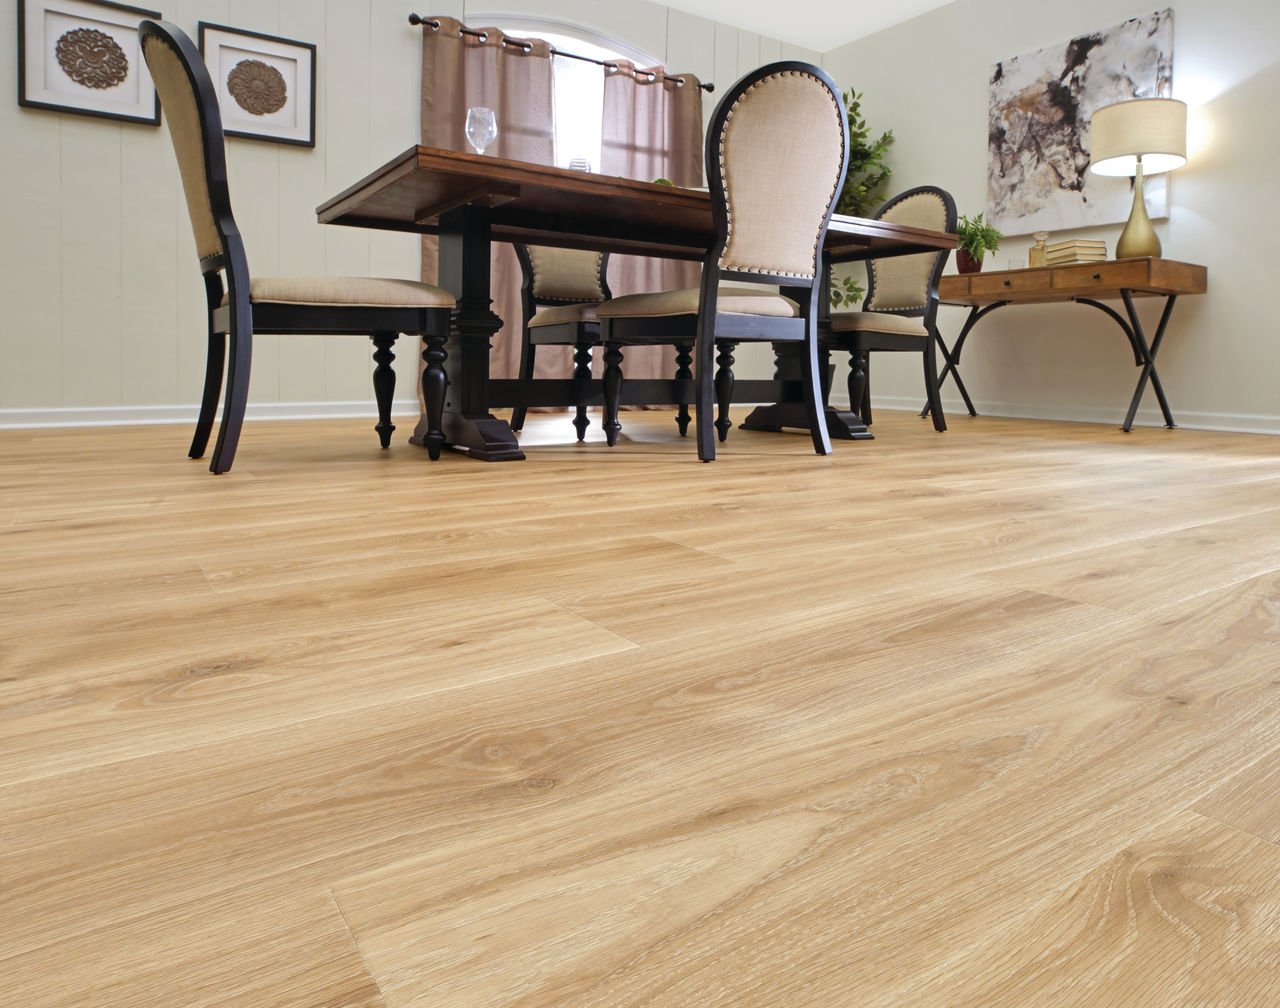 Our customers receive the highest quality products and service at Good Brothers Flooring Plus in Rocklin, CA